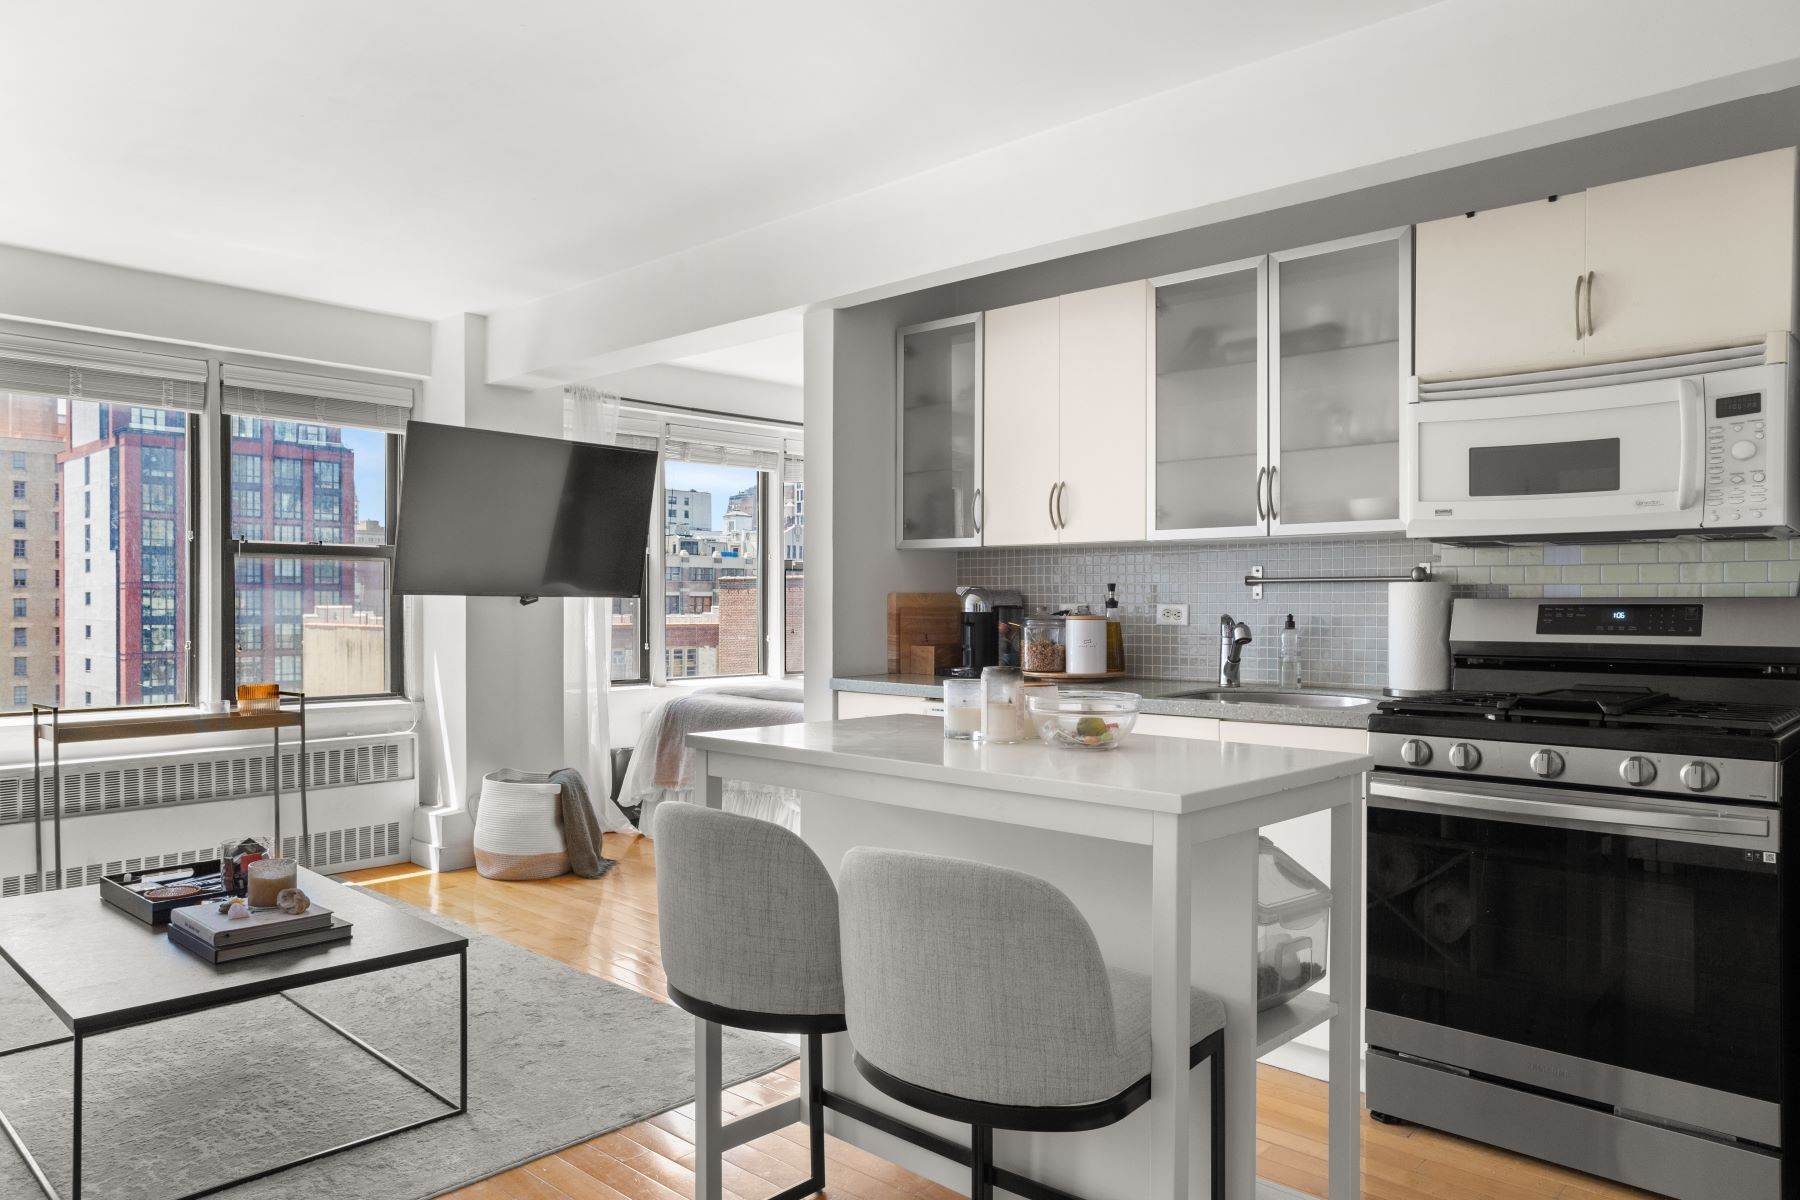 Co-op Properties for Sale at 245 East 24th Street, Apt 11K 245 East 24th Street, 11K New York, New York 10010 United States